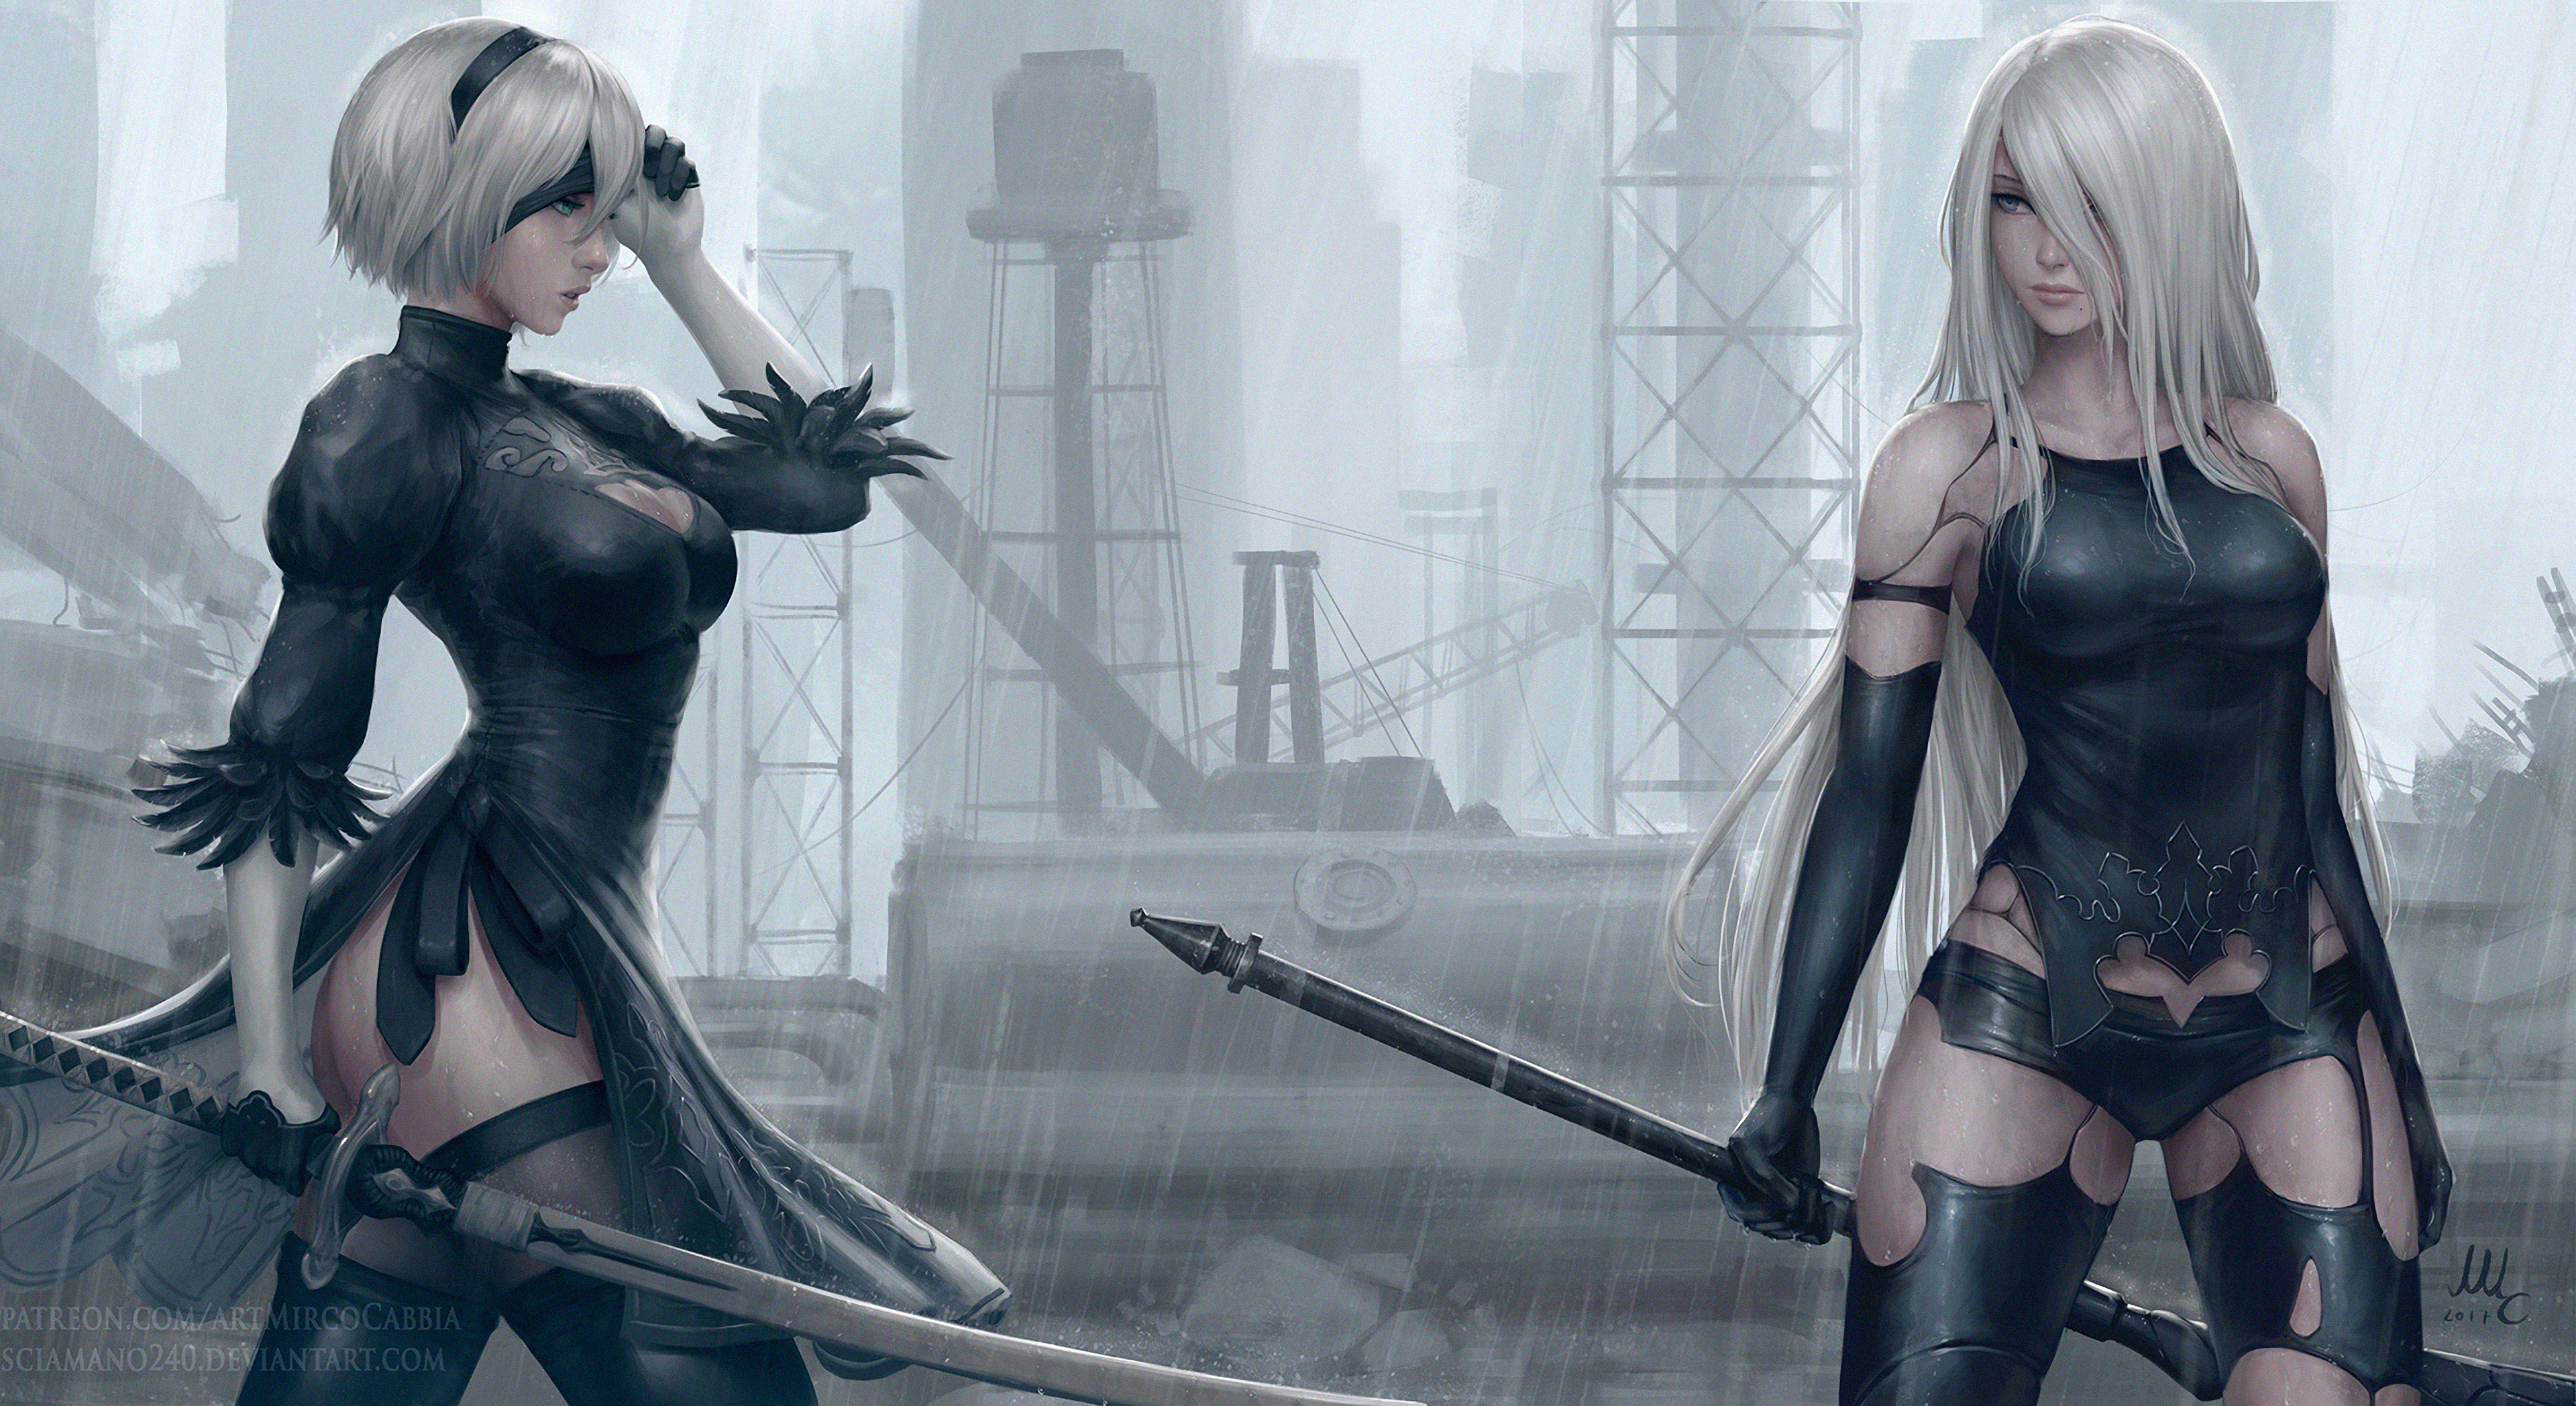 2b And Nier Automata Hd Games 4k Wallpapers Images Backgrounds Photos And Pictures